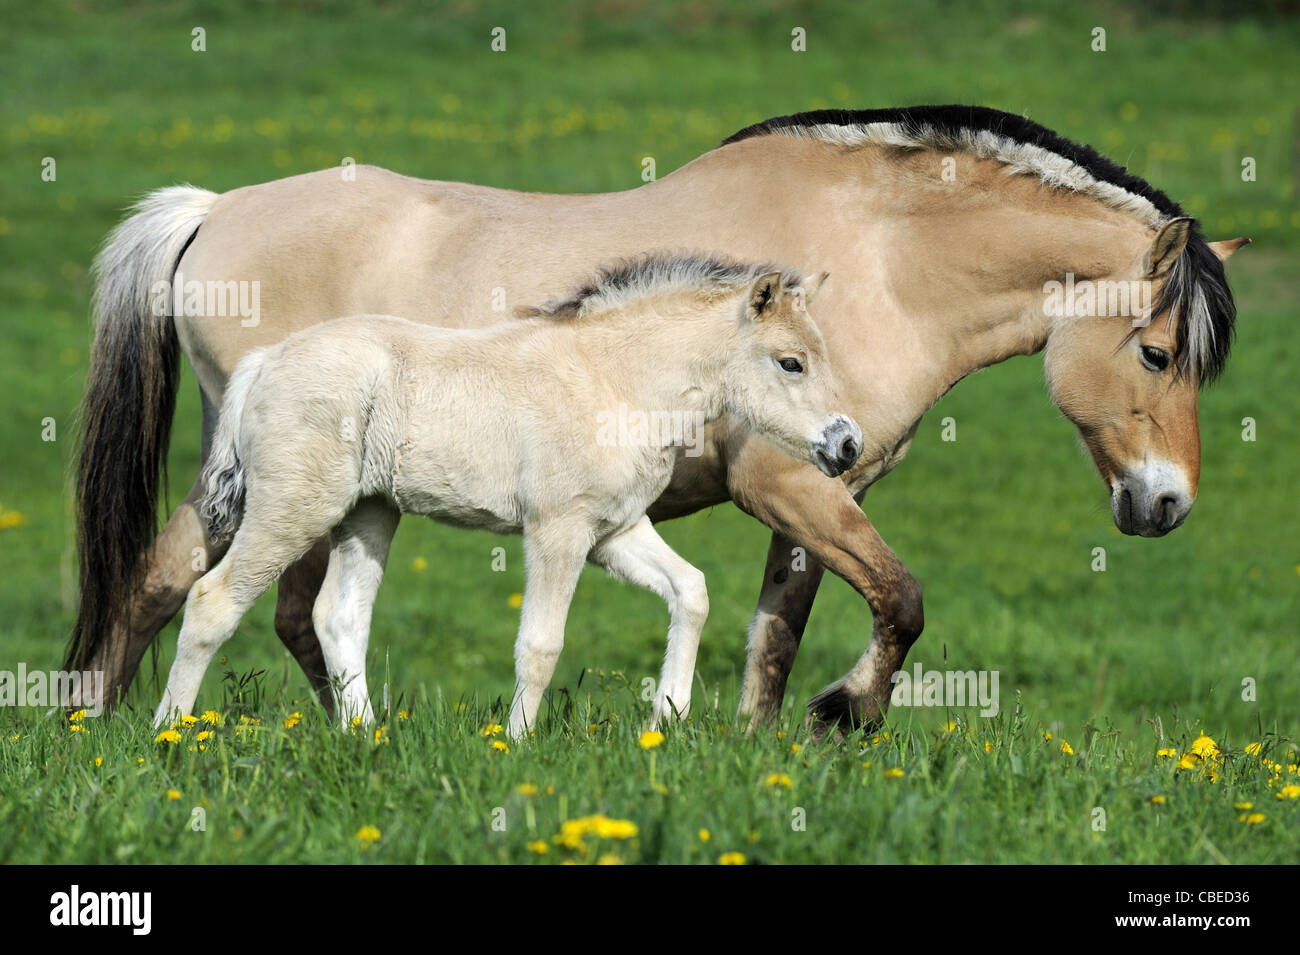 Norwegian Fjord Horse (Equus ferus caballus). Mare with foal walking on a meadow. Stock Photo